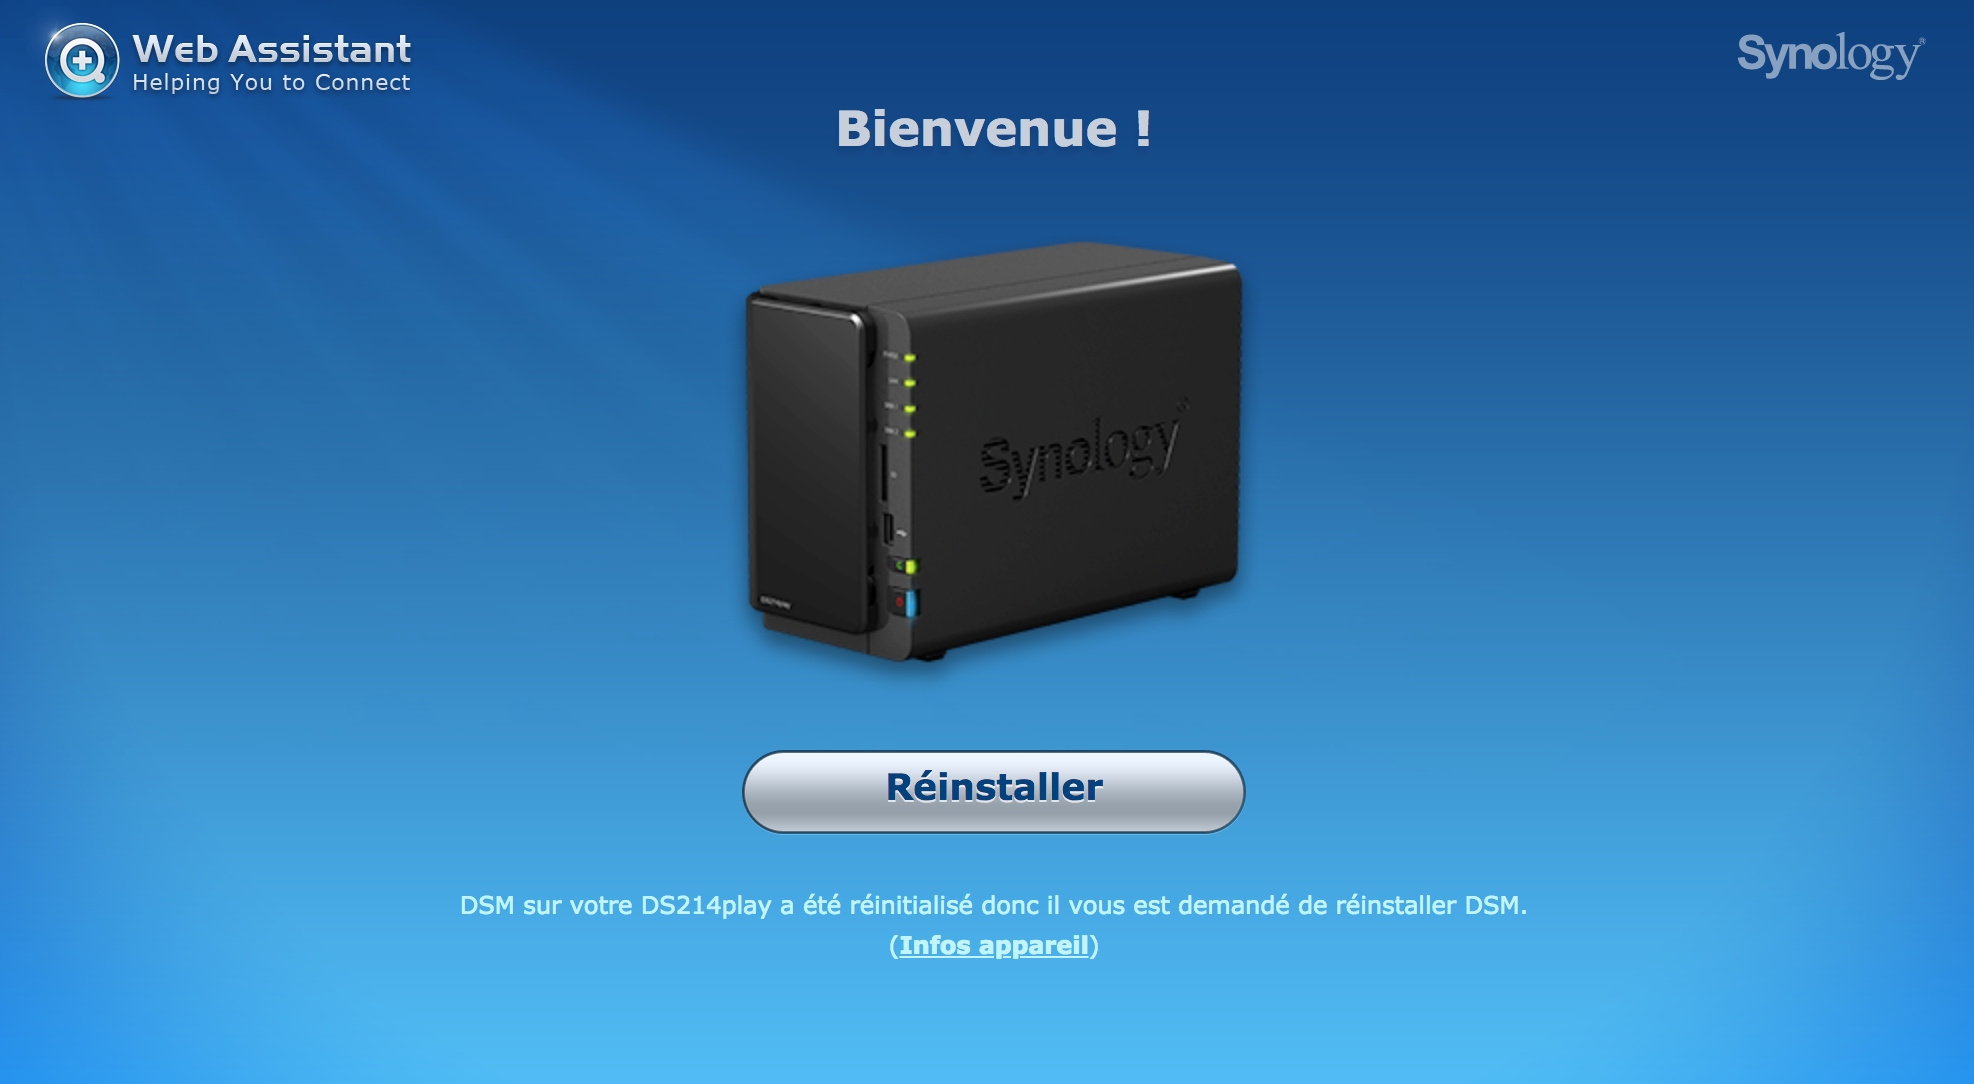 Synology connect. Synology ds216. Синолоджи. Synology ds720+ Synology. Сетевой накопитель (nas) Synology ds216play.